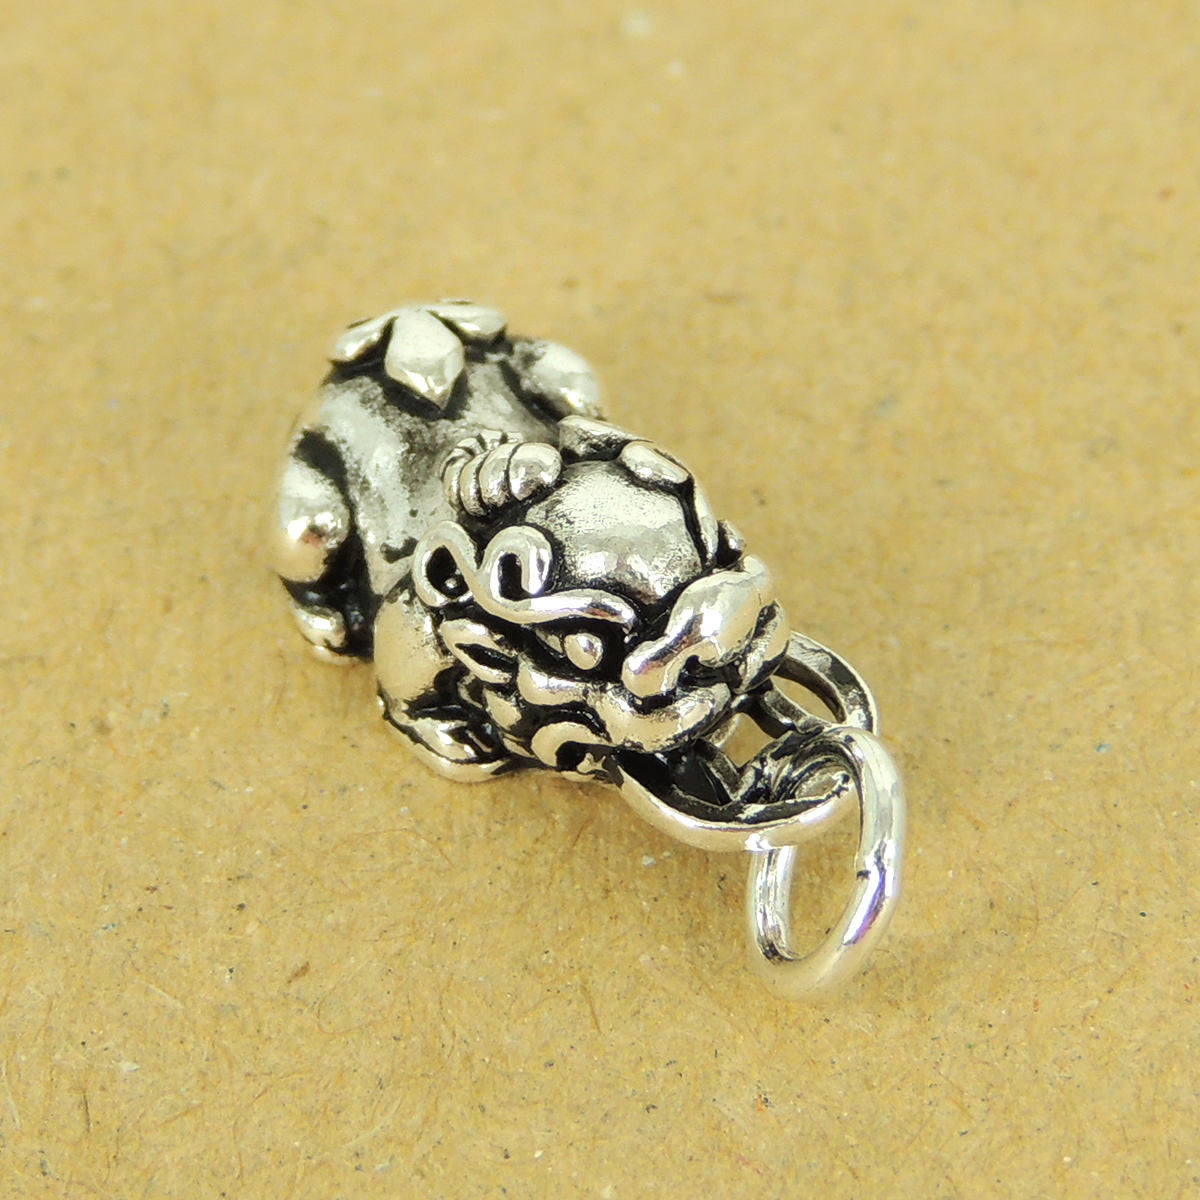 1 PC Chinese Brave Troop Protection Charm/Pendant - Genuine S925 Sterling Silver